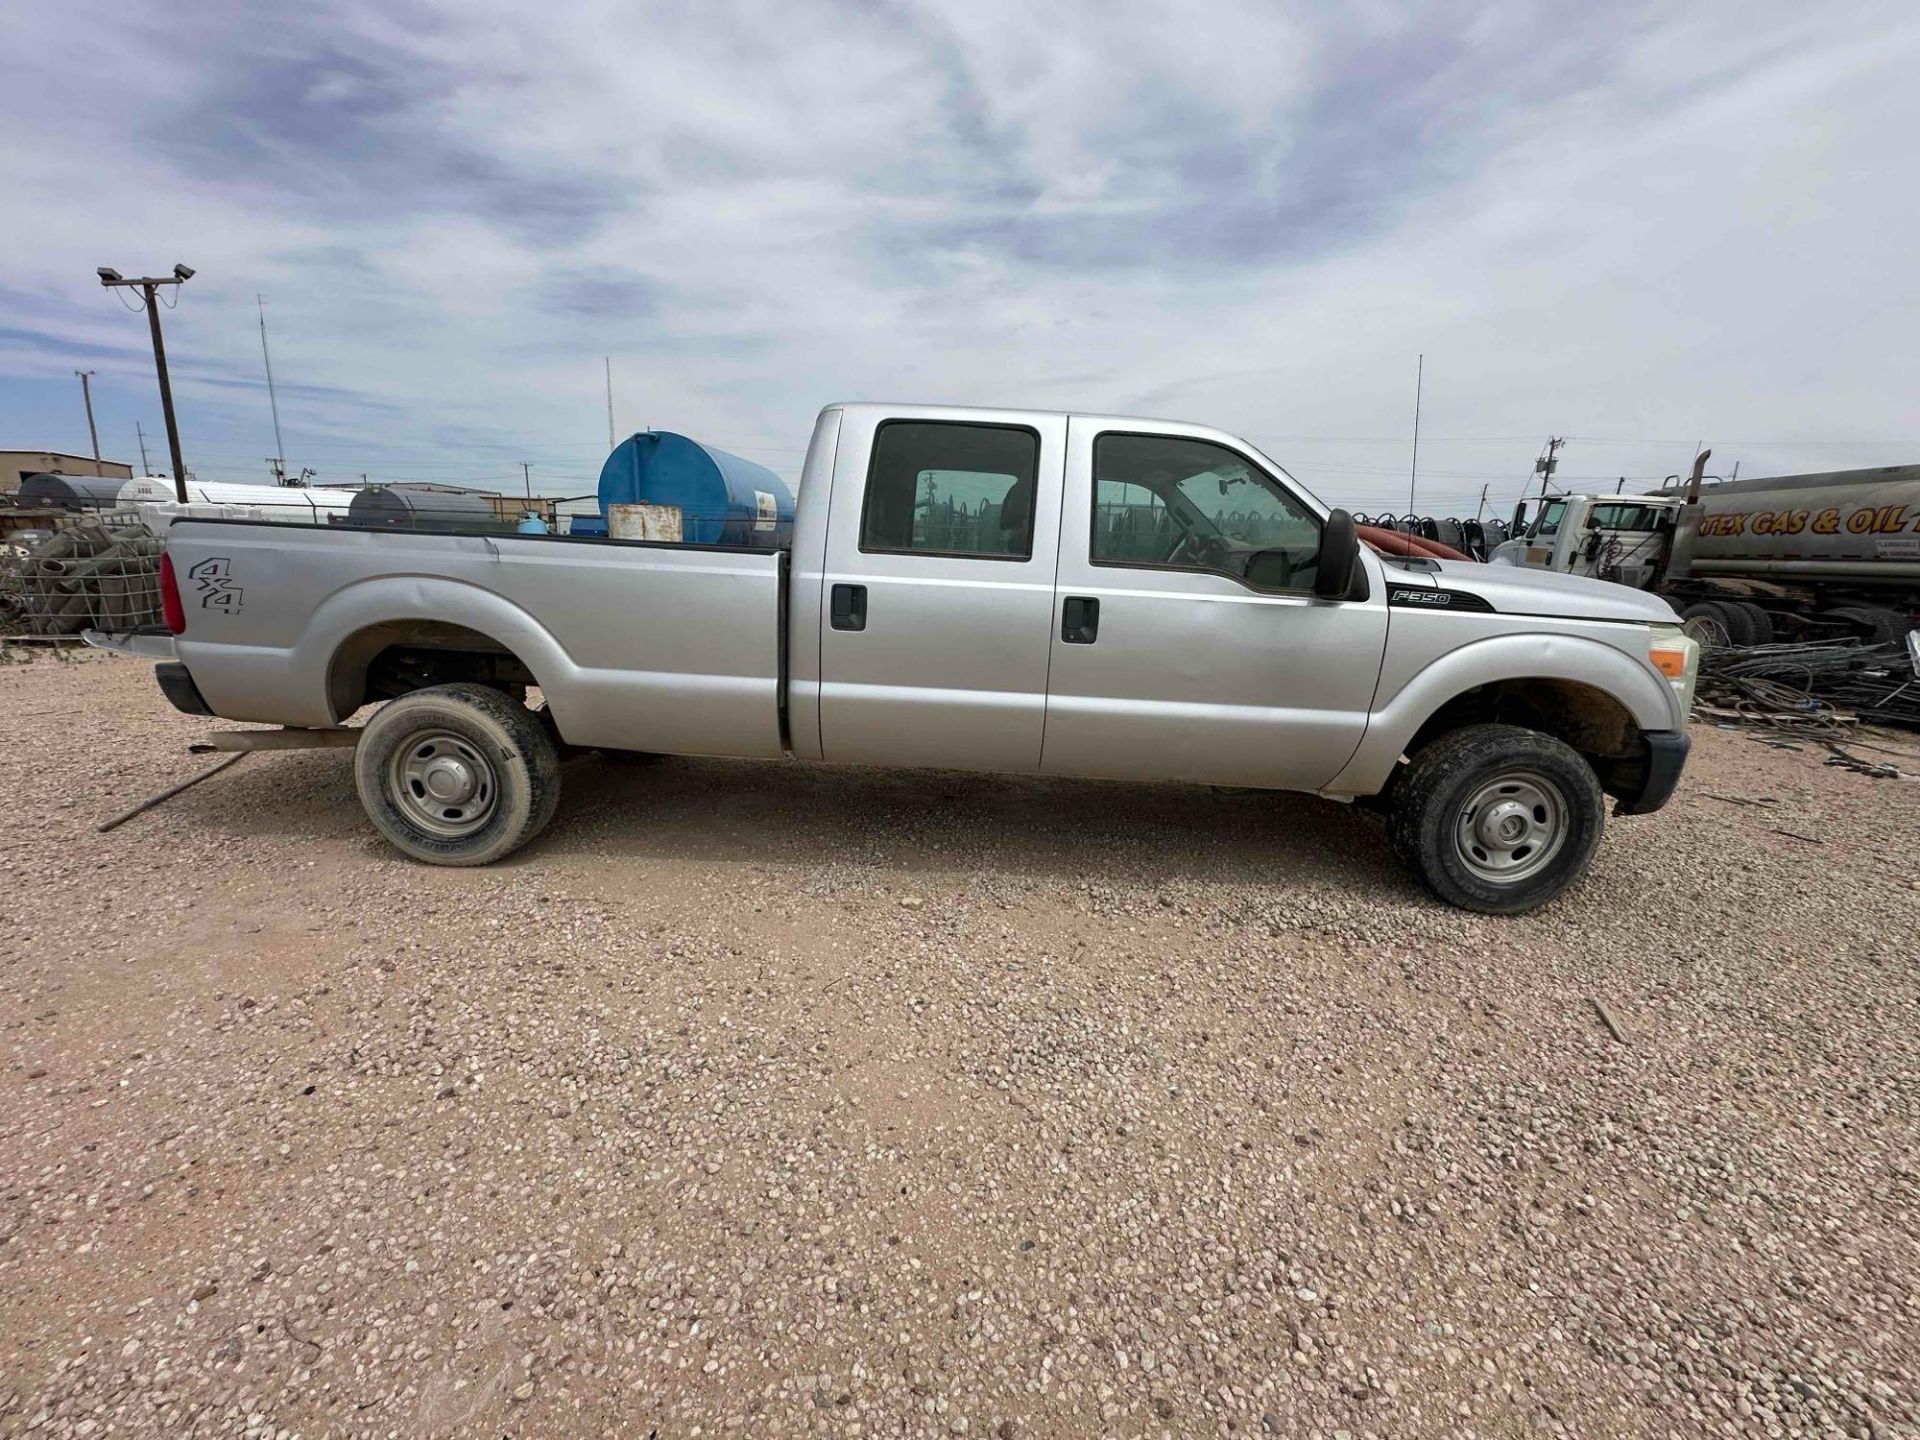 2011 Ford F350 SD Crew Cab Pickup Truck - Image 4 of 20